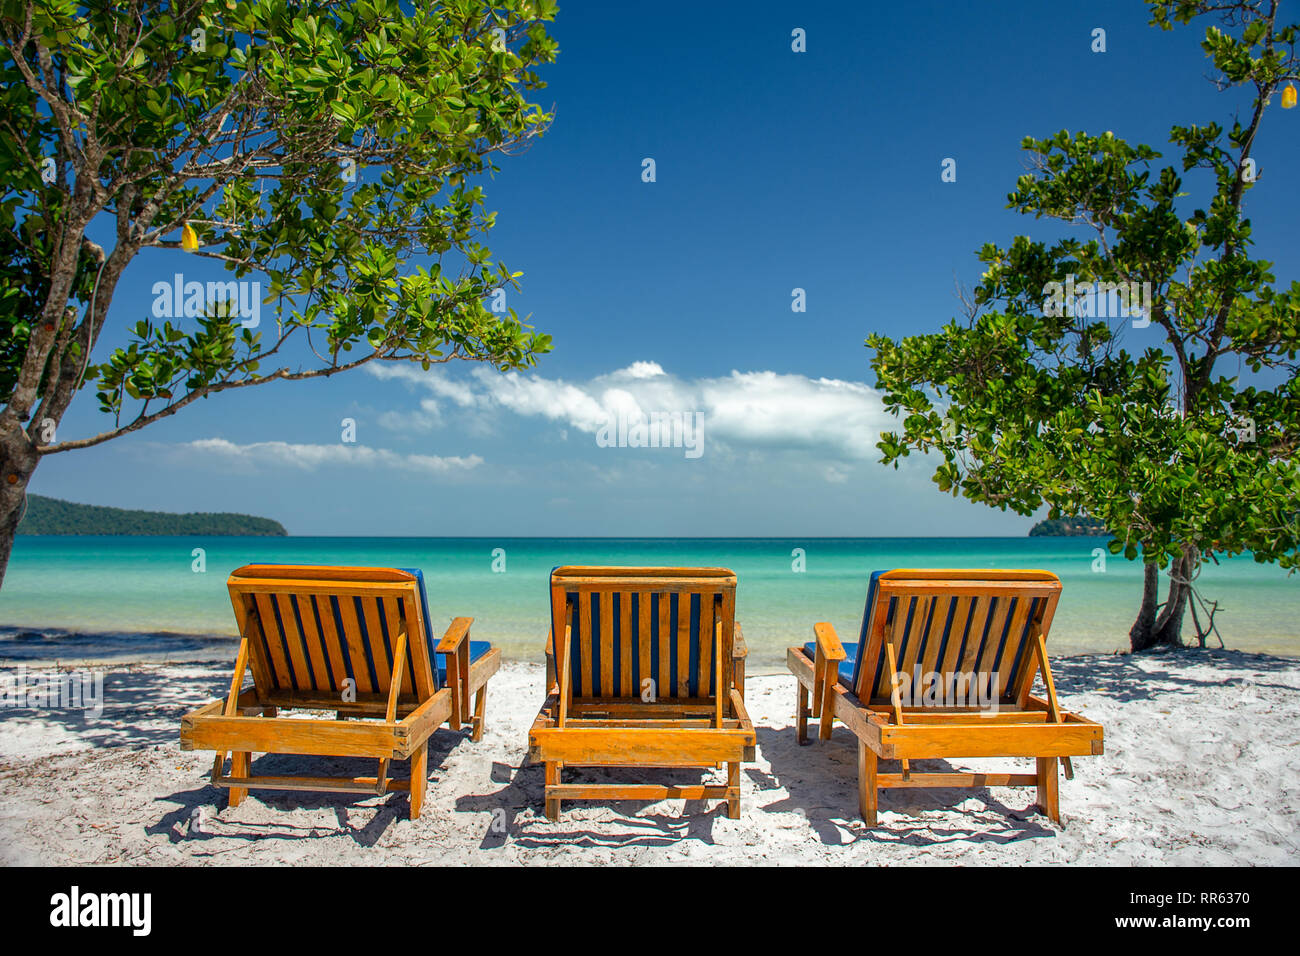 Three luxury wooden sun loungers in a line on a white sand paradise island beach with turquoise sea. Stock Photo